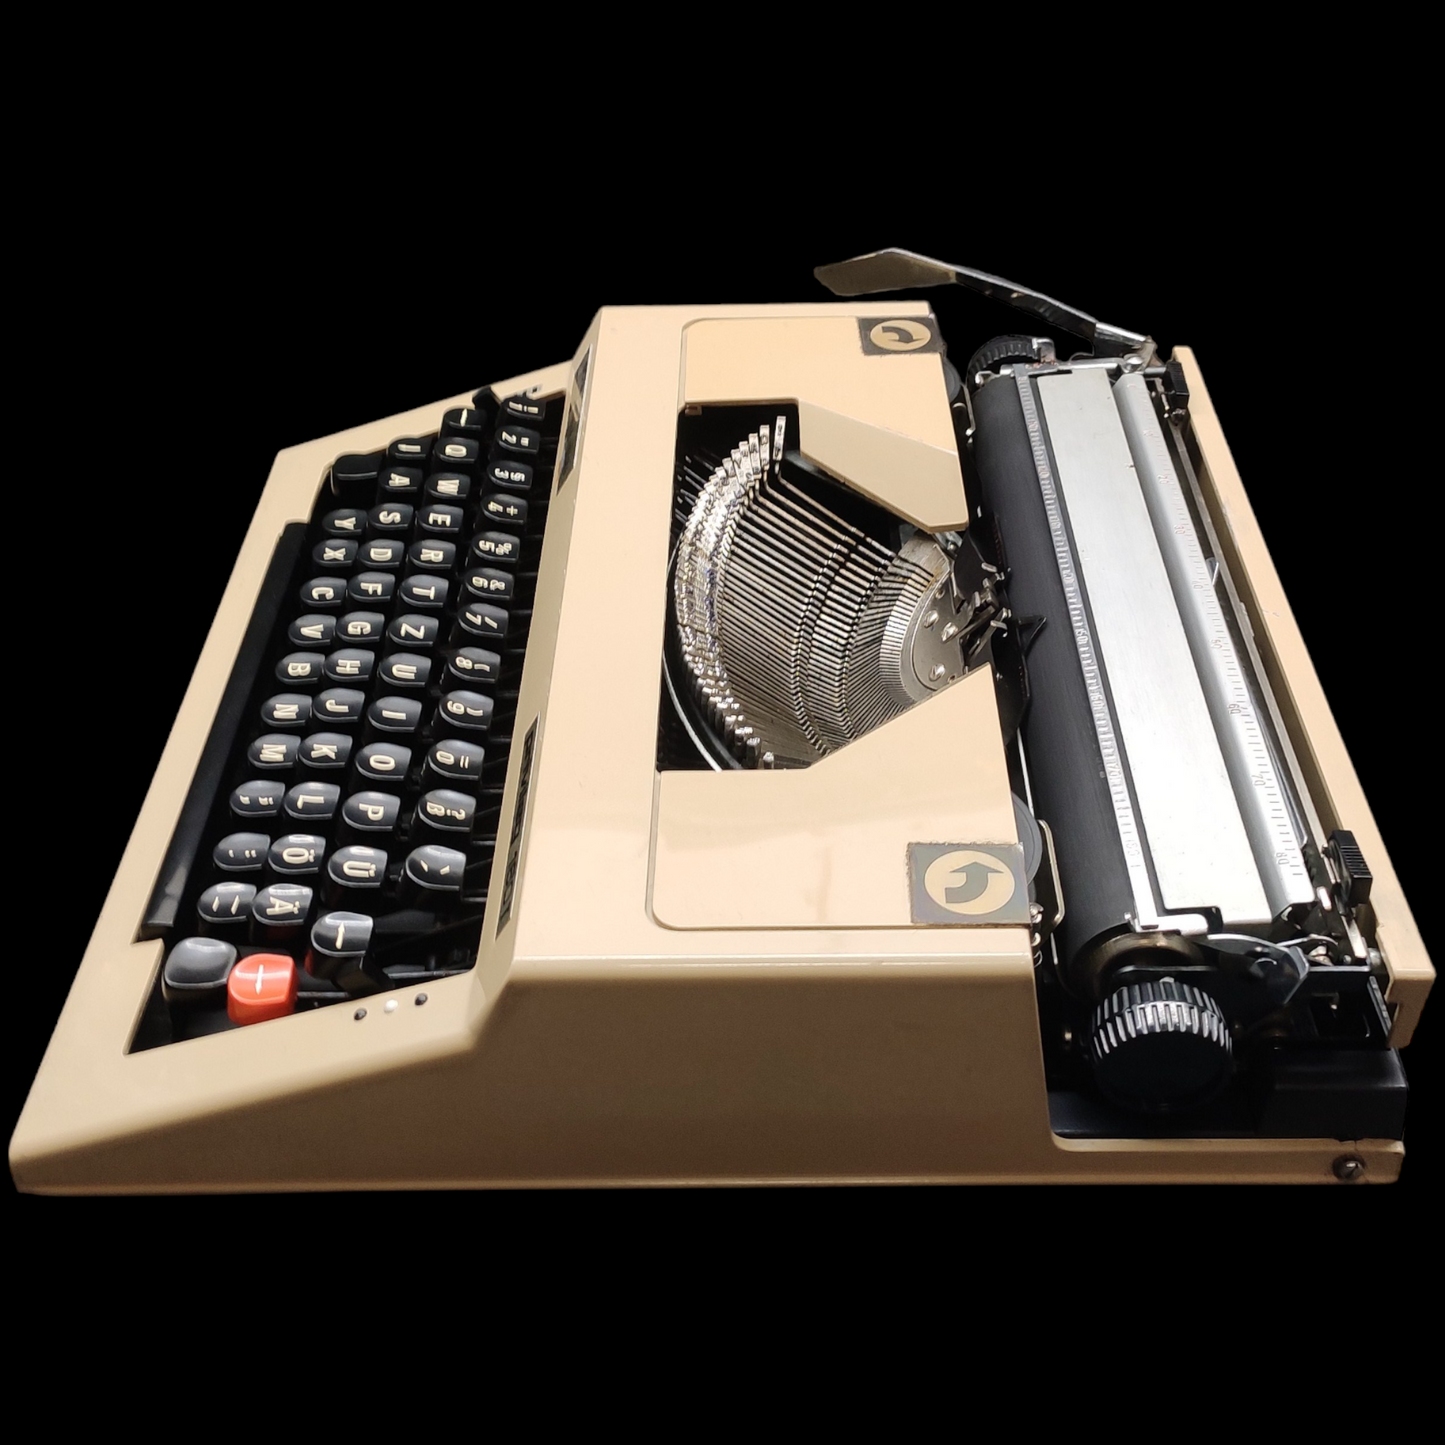 Image of Privileg 160T Typewriter. Available from universaltypewritercompany.in